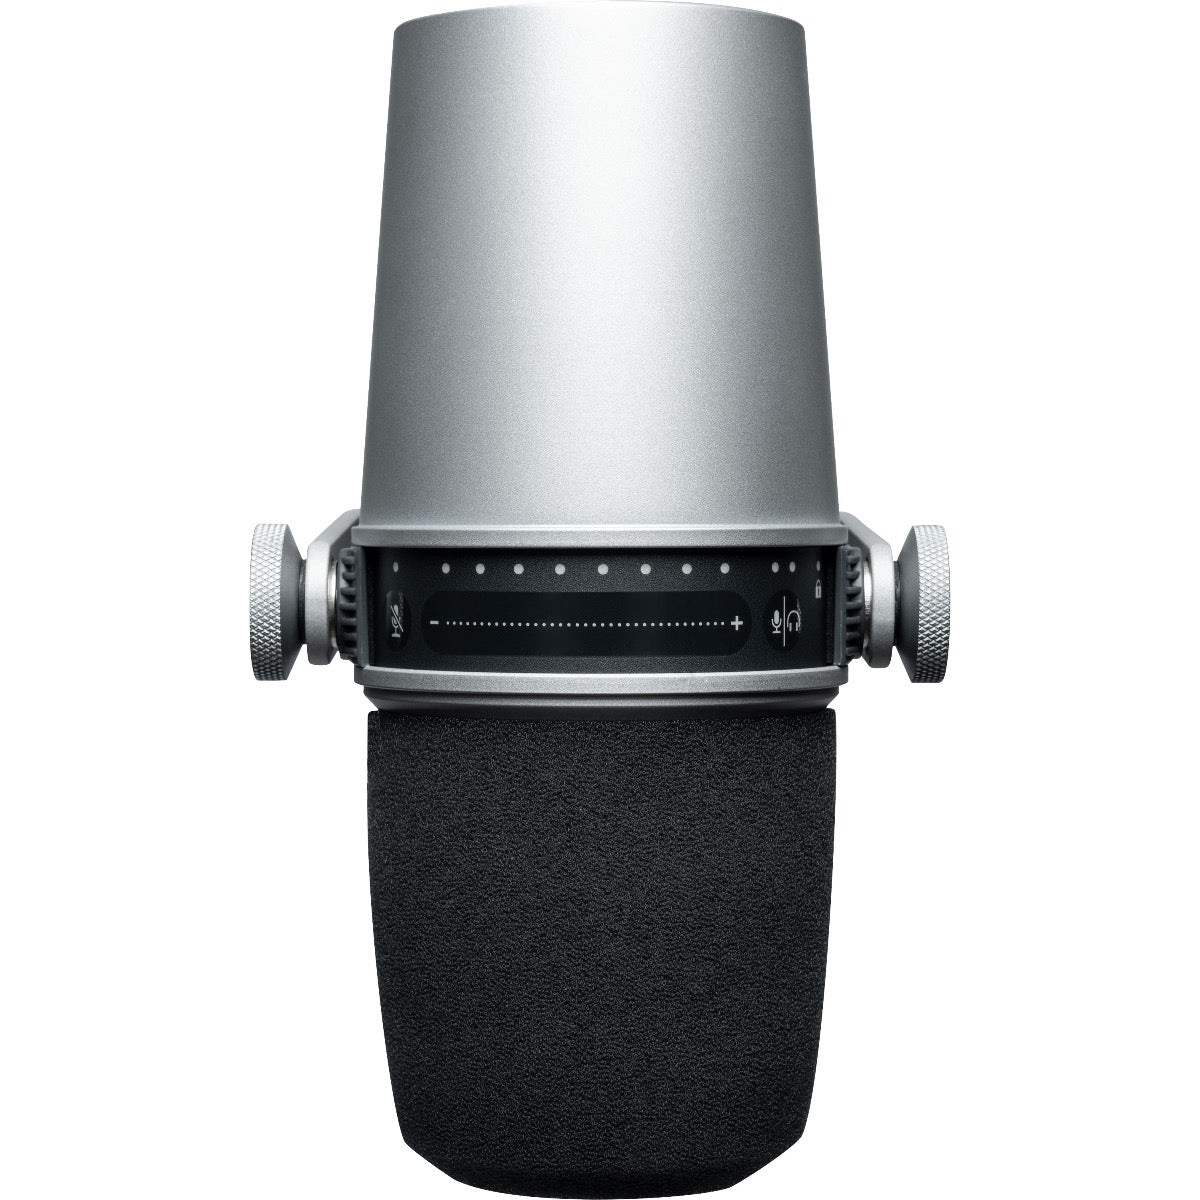 Top view of Shure MV7 Podcast Microphone - Silver showing touch control panel